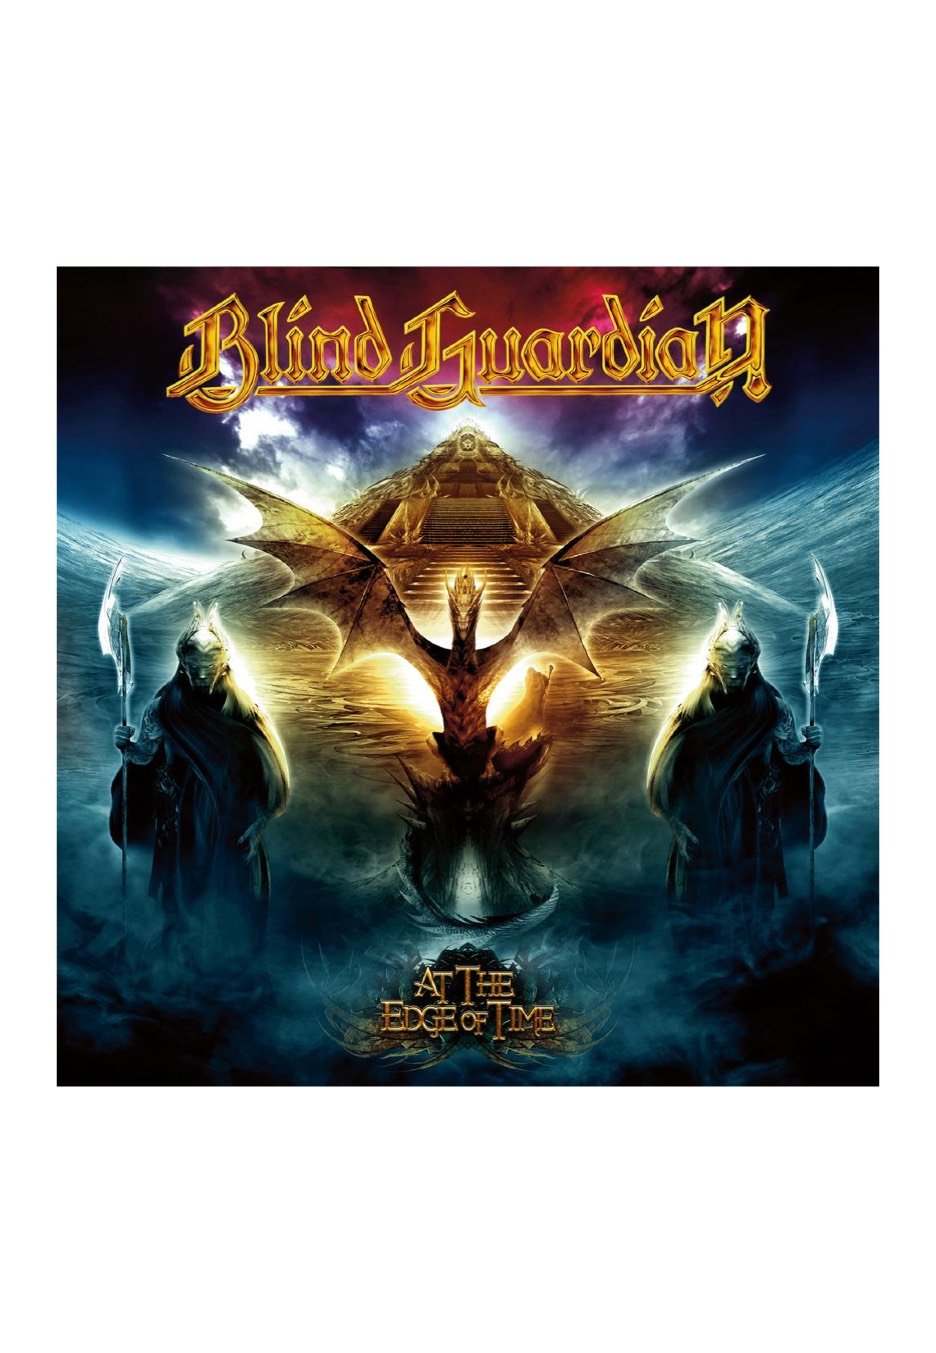 Blind Guardian - At The Edge Of Time - CD | Neutral-Image